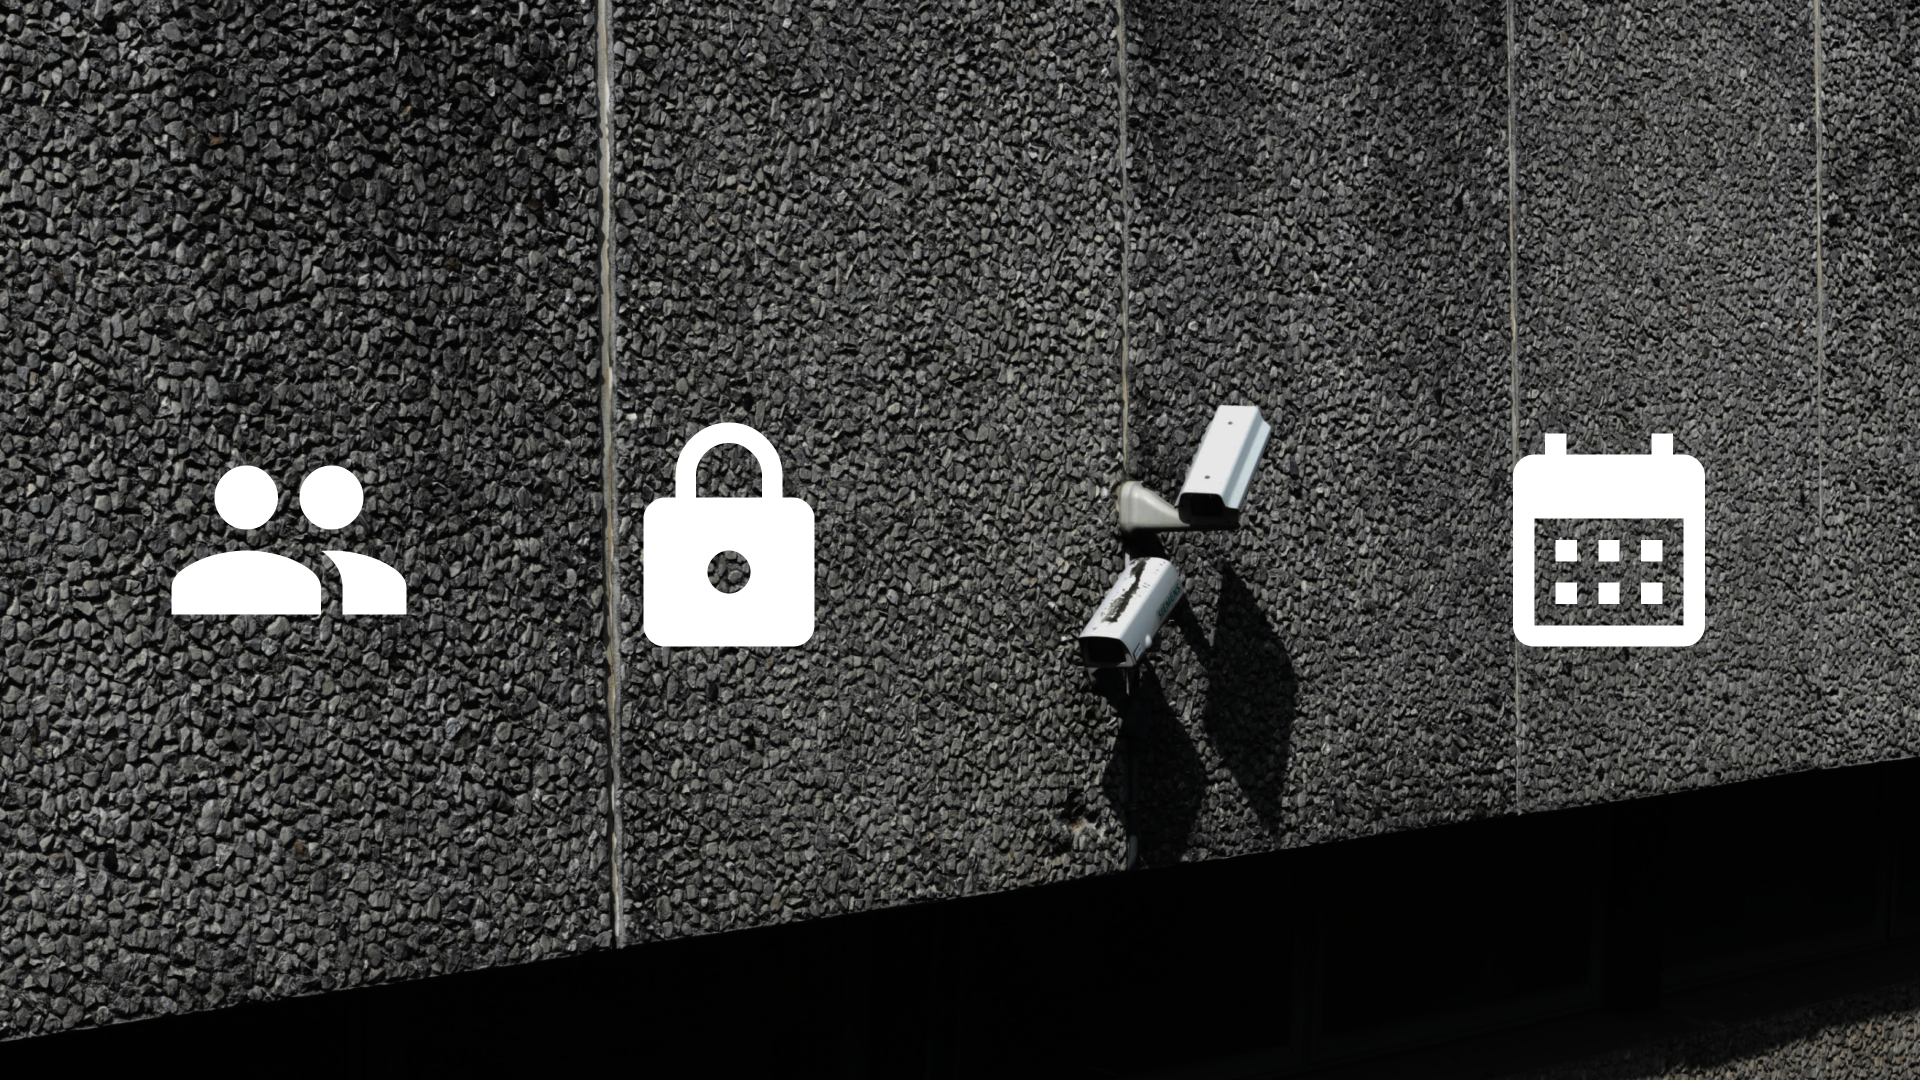 Icons of a group of people, a padlock, a CCTV camera, and a calendar, with the CCTV camera being a part of the background photo on a brutalist building.